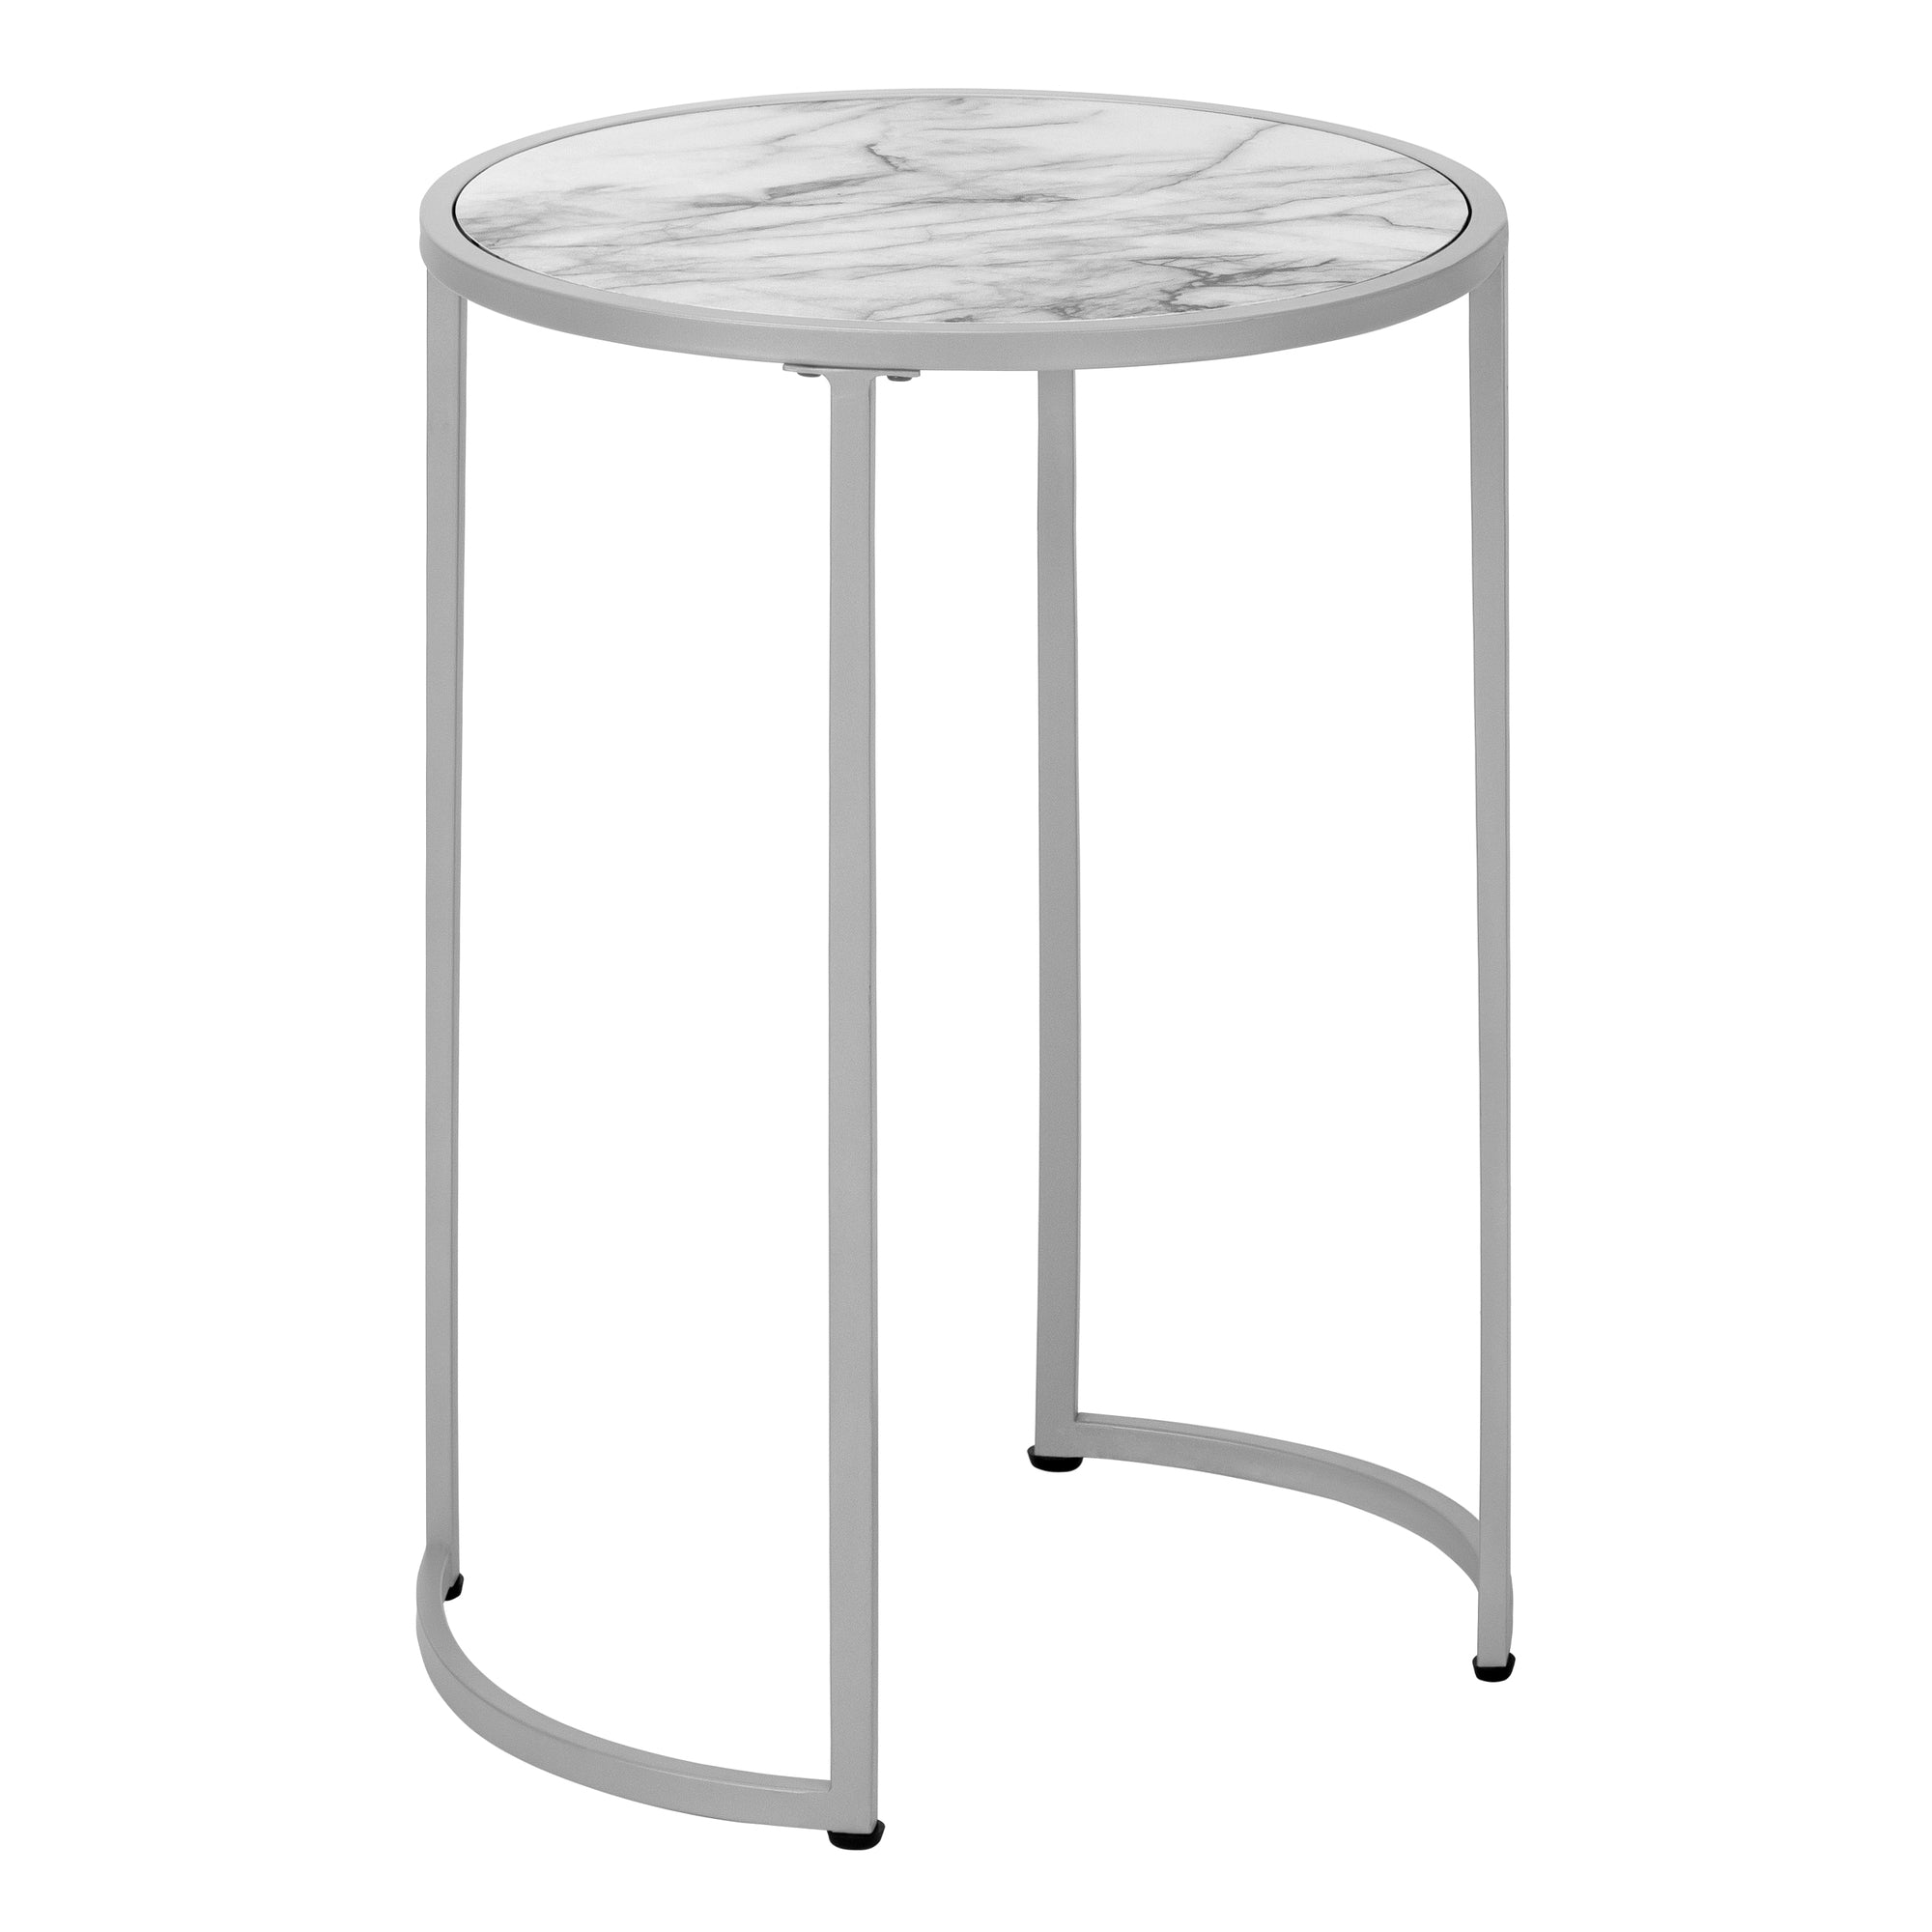 MN-502205    Accent Table, Side, End, Nightstand, Lamp, Living Room, Bedroom, Metal Base, Laminate, White Marble Look, Contemporary, Modern